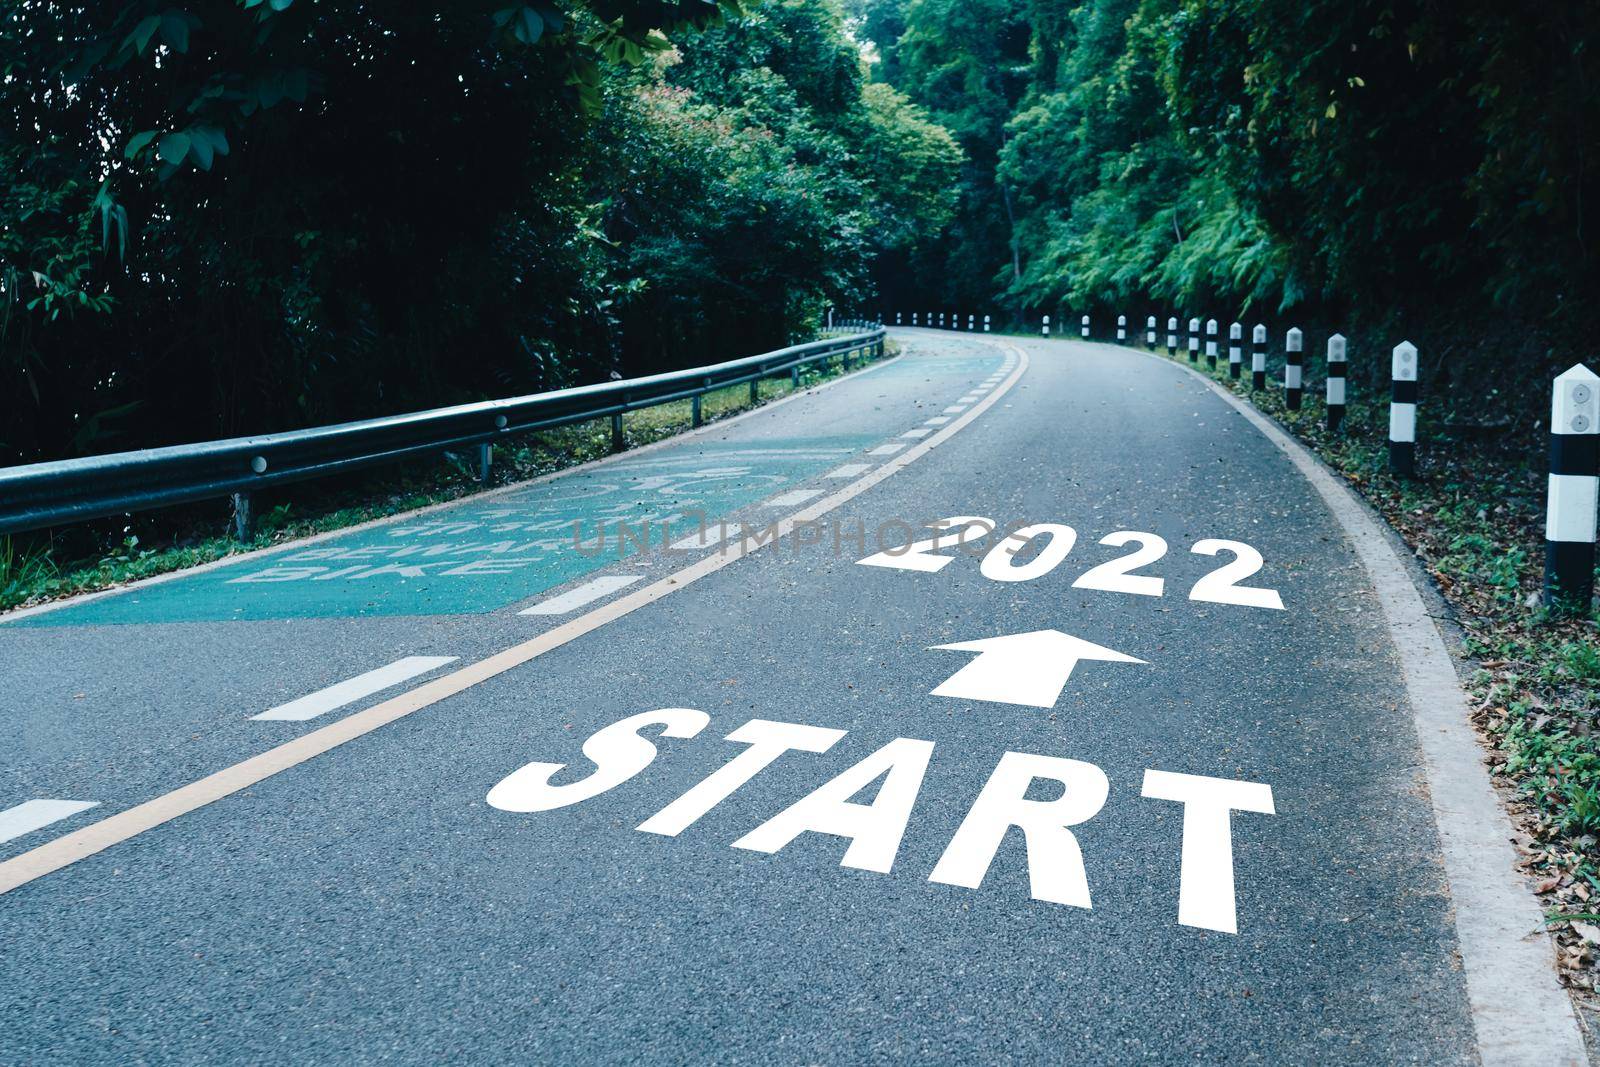 Start line to 2022 on road in wood the beginning of a journey to the destination in business planning, strategy and challenge or career path, opportunity concept.